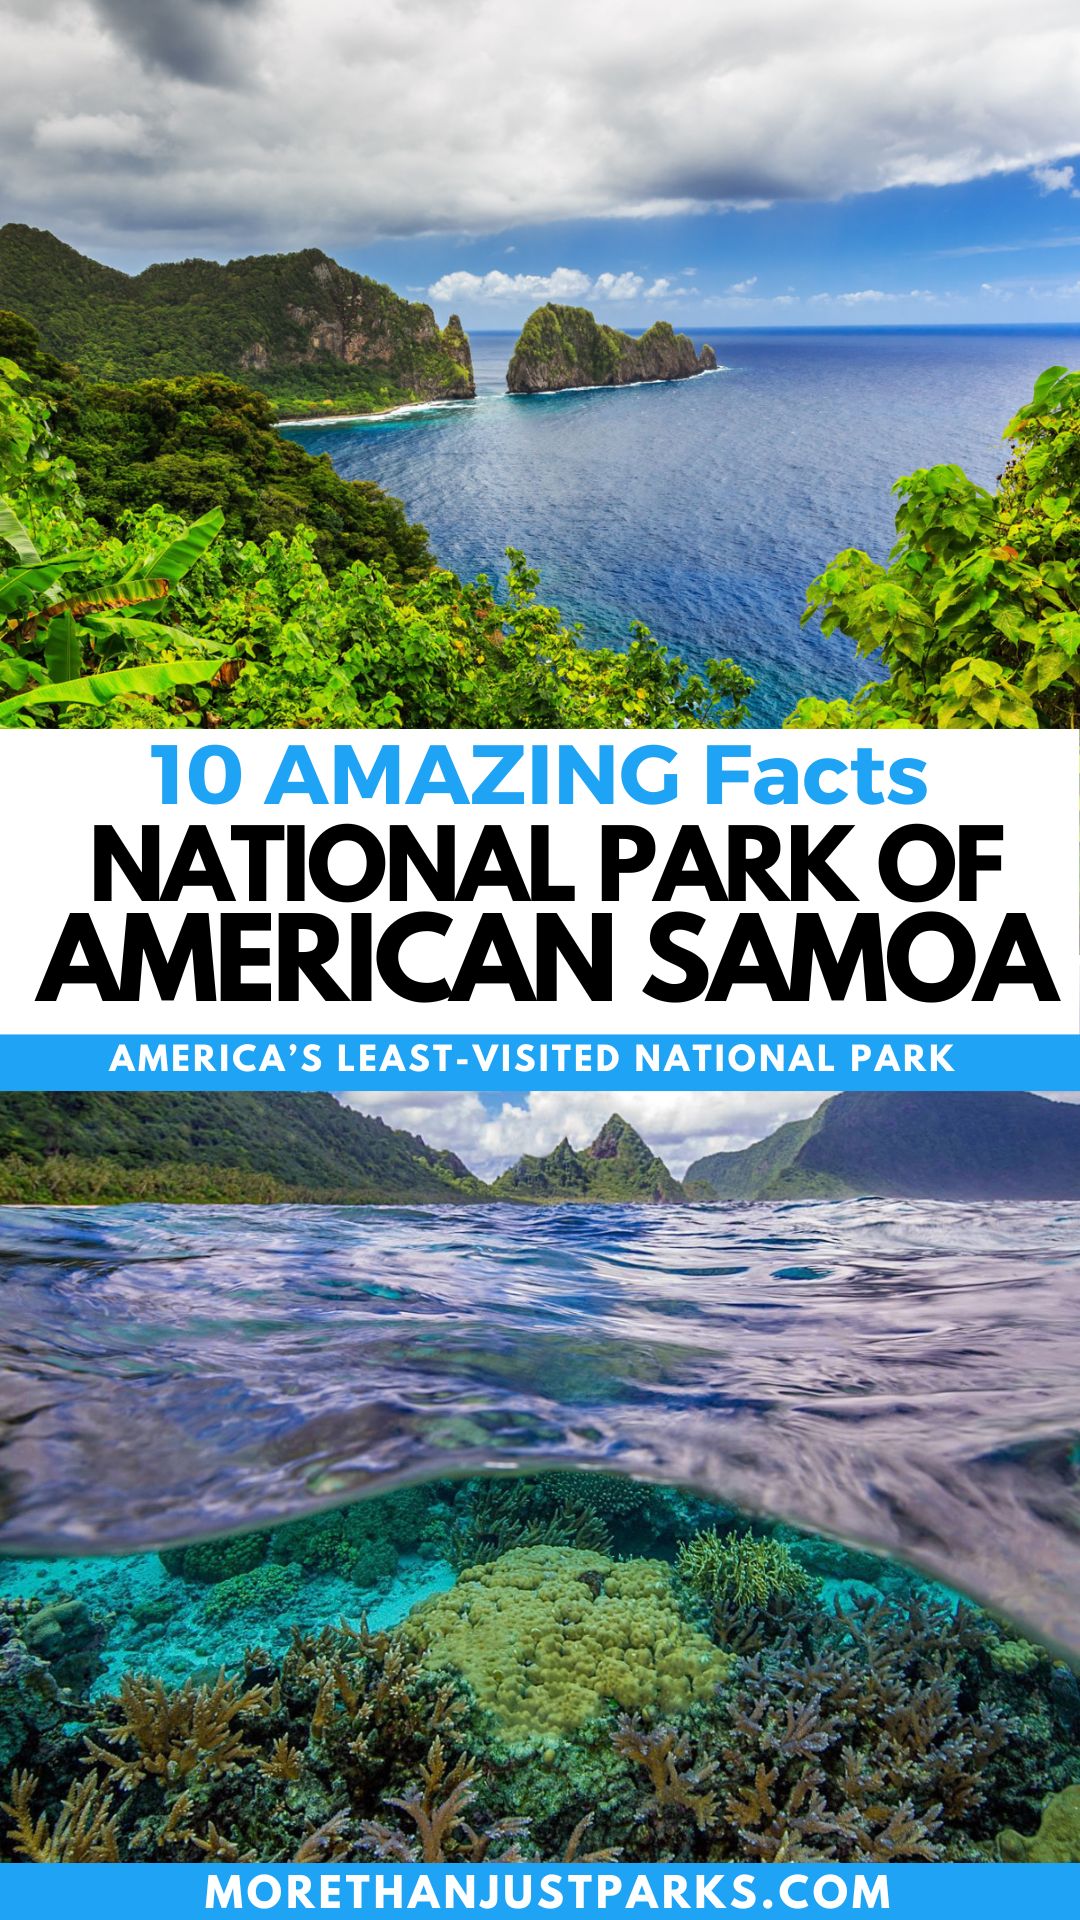 National Park of American Samoa Facts Graphic